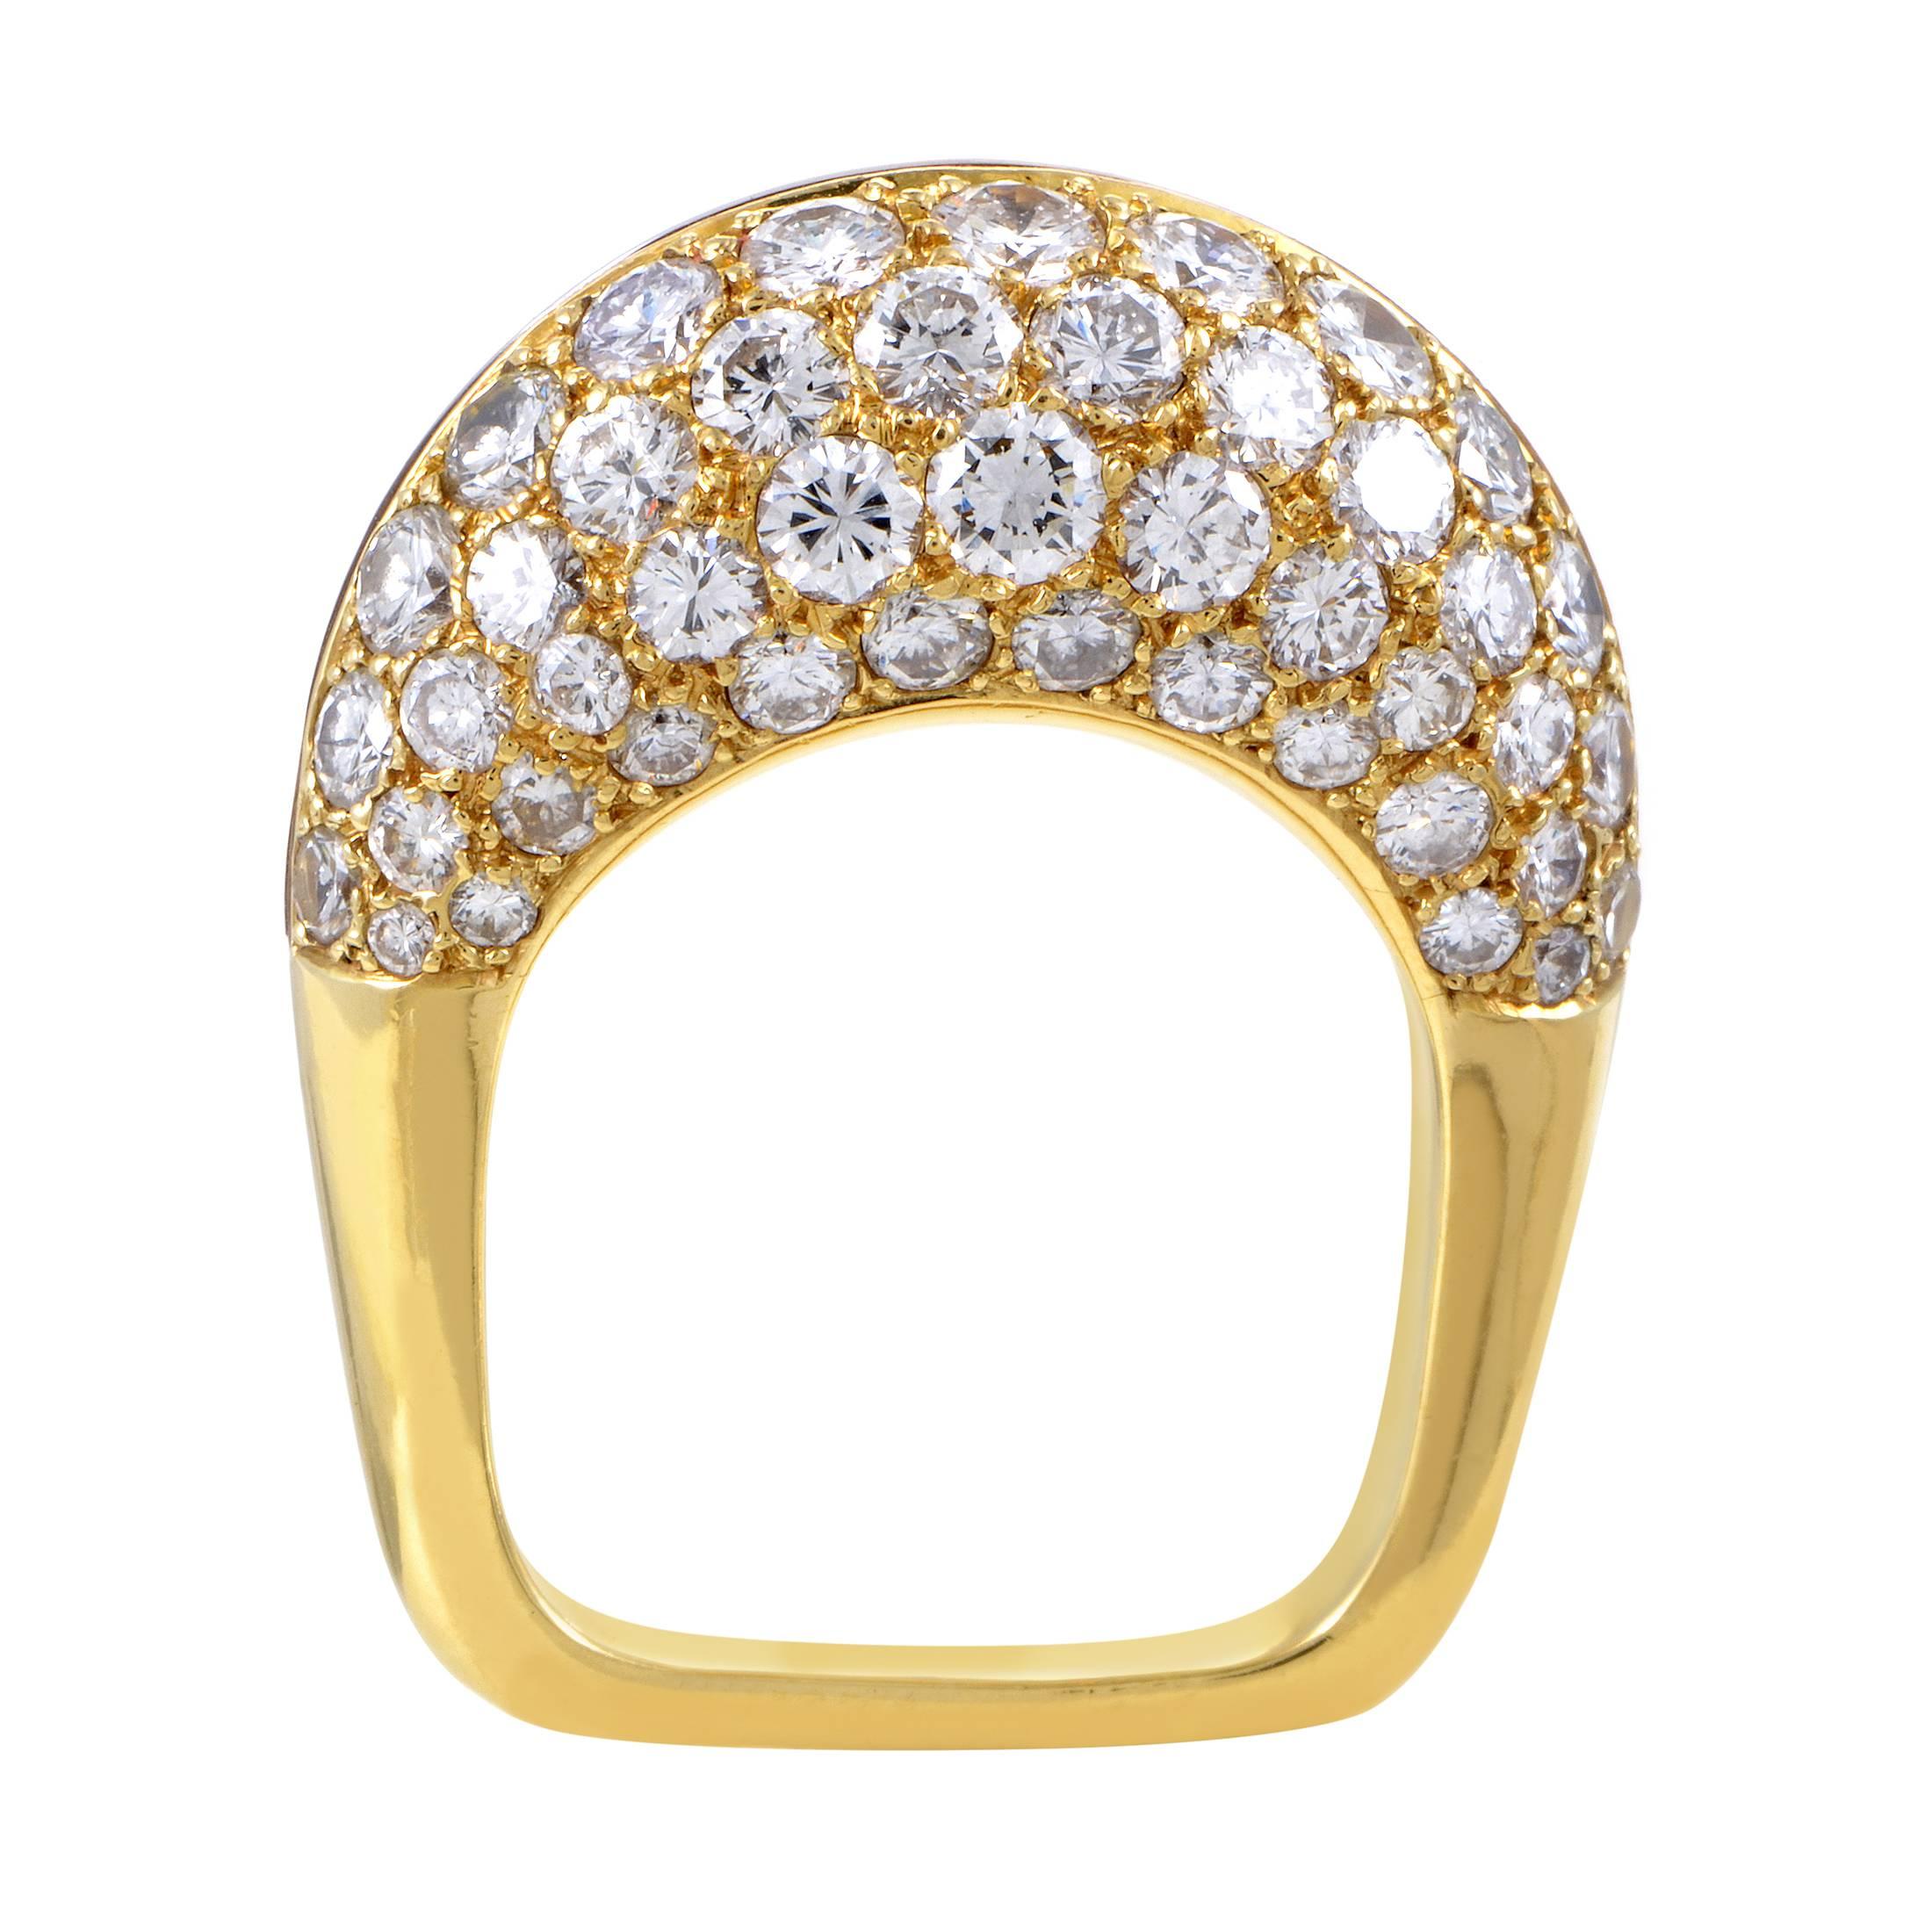 Employing tasteful duality in design to produce an intriguing visual effect while retaining pleasant harmony in delightful colors, Mauboussin present this fabulous ring made of 18K yellow gold embellished with F-color diamonds of VVS clarity